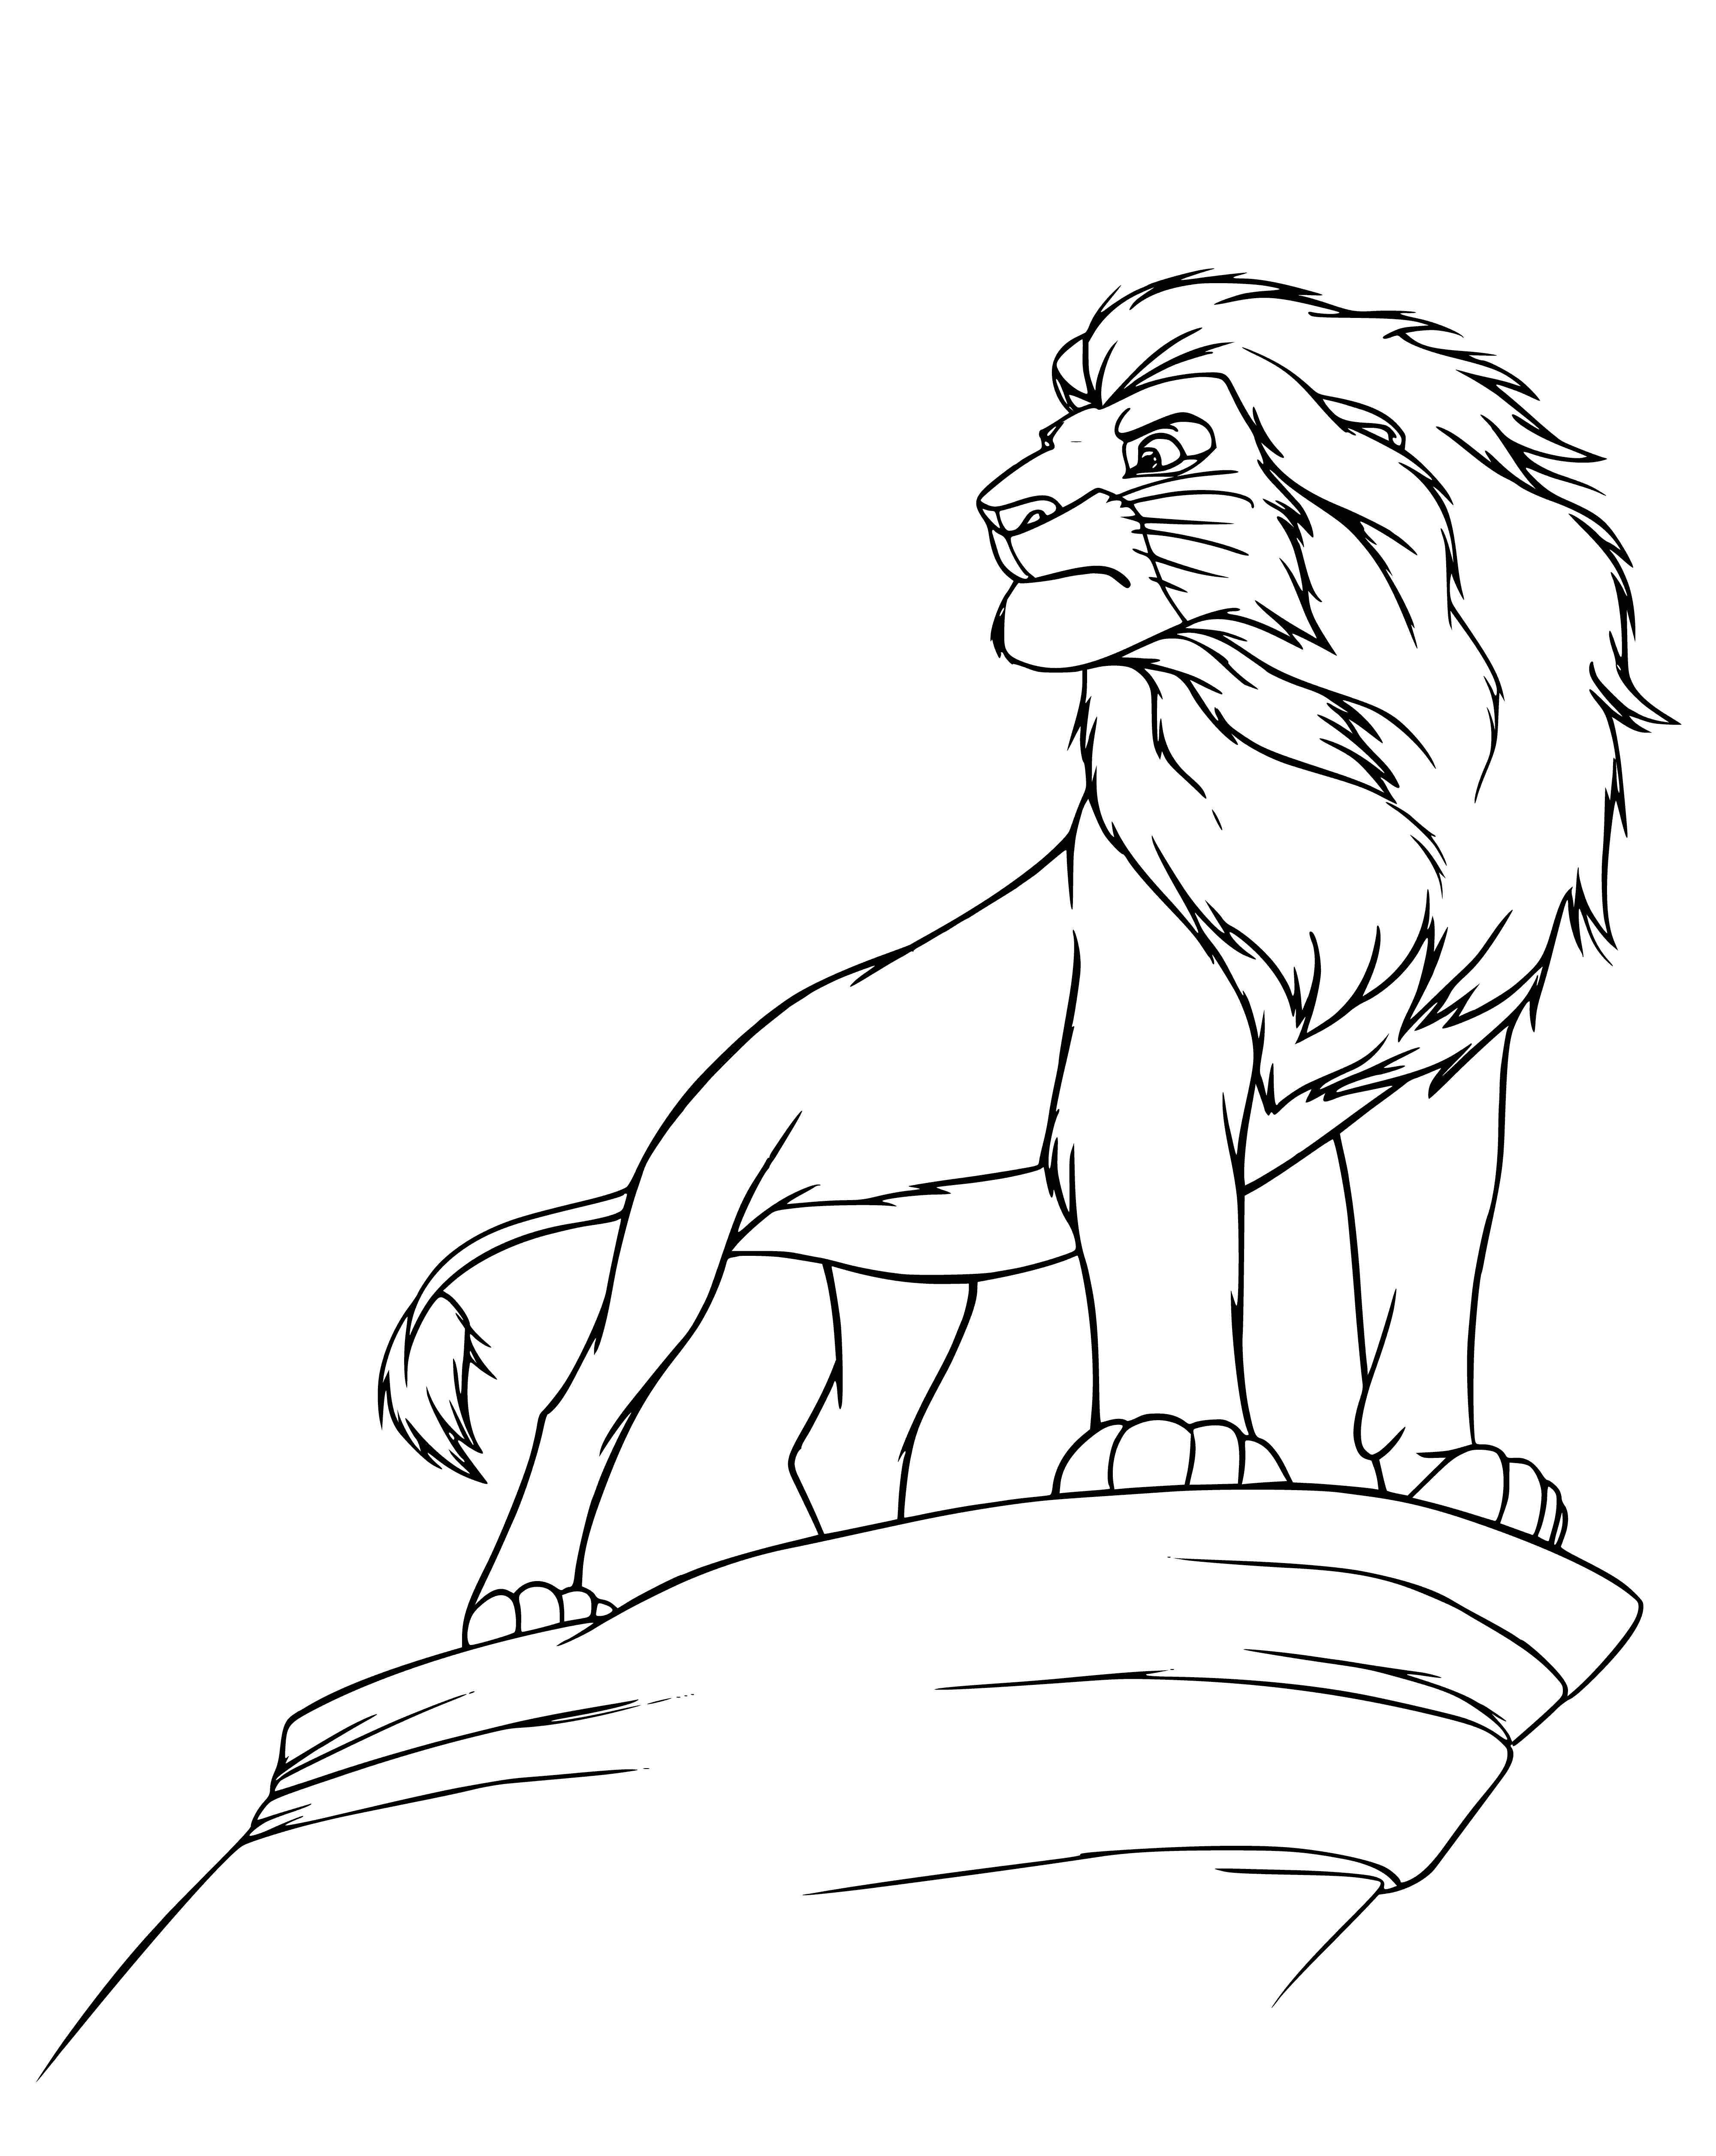 Simba on the rocks coloring page